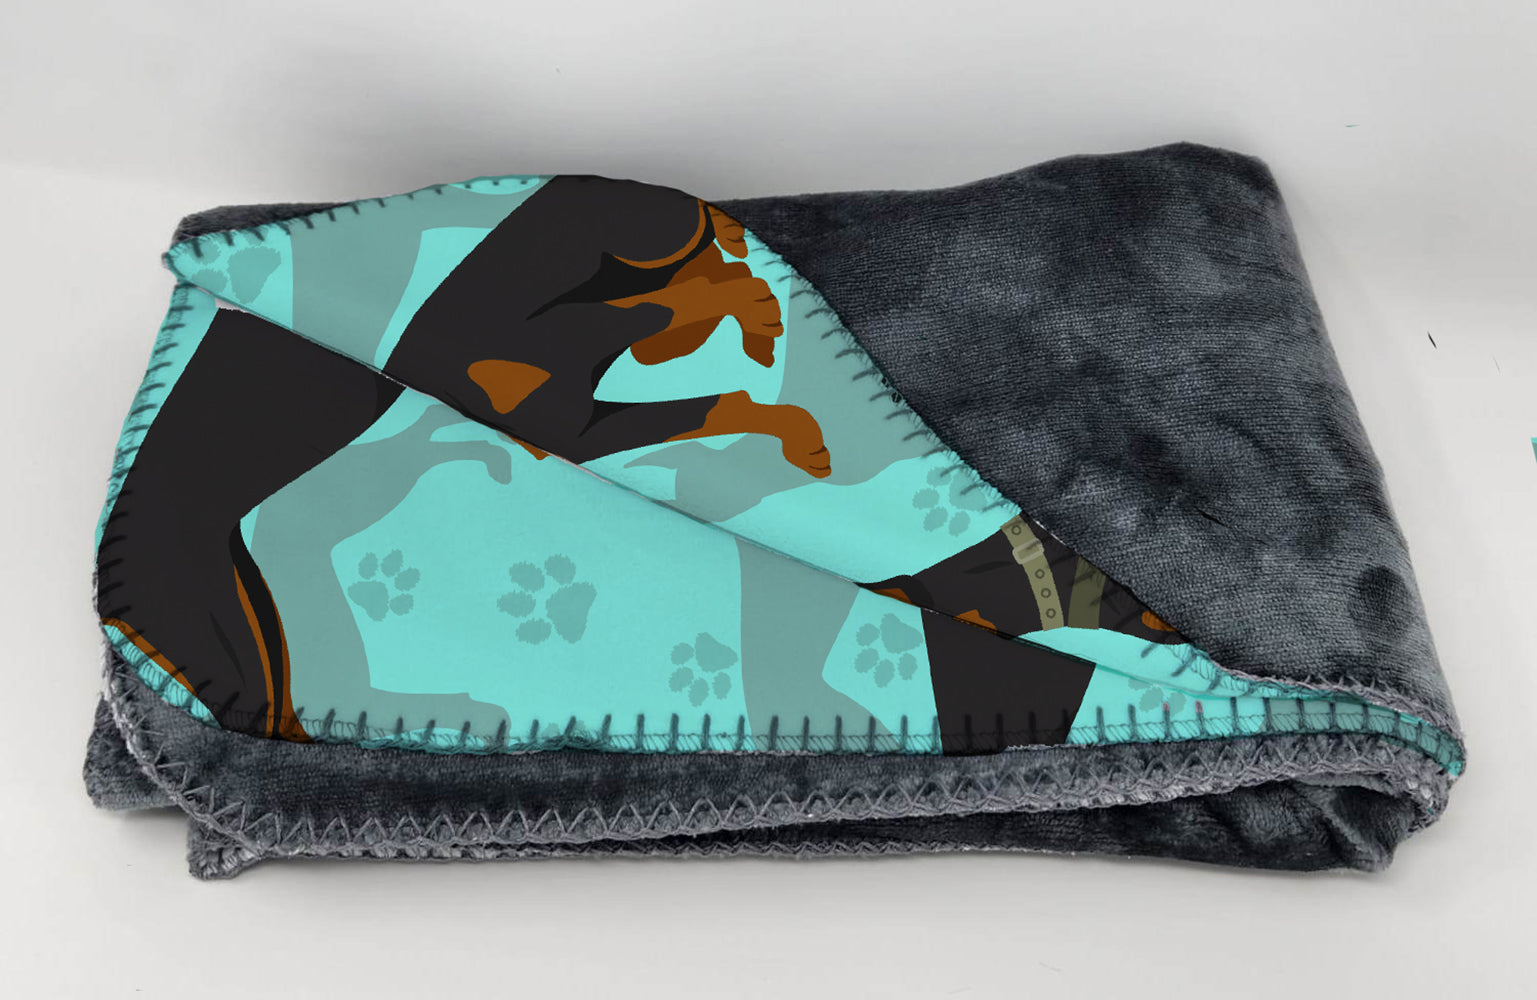 Buy this Doberman Pinscher Soft Travel Blanket with Bag